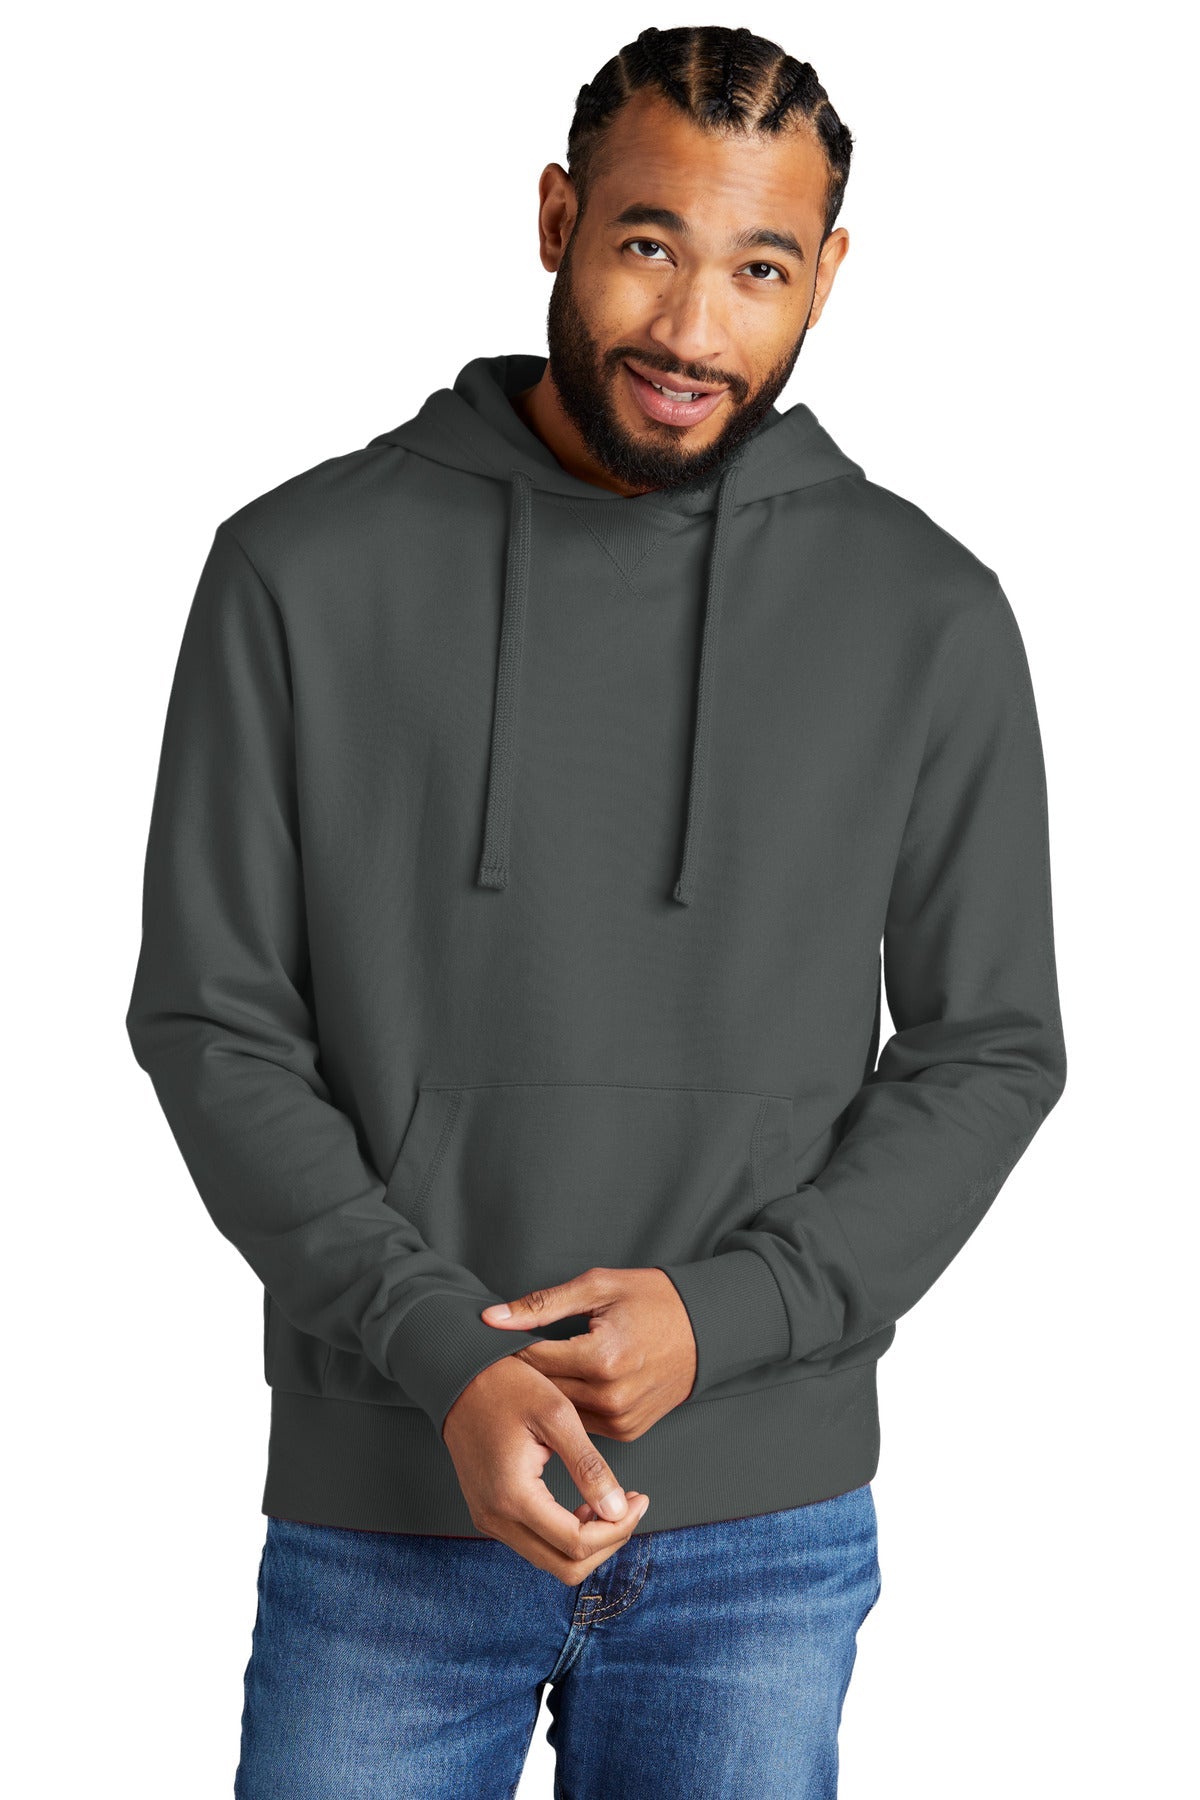 Allmade® Unisex Organic French Terry Pullover Hoodie AL4000 - DFW Impression